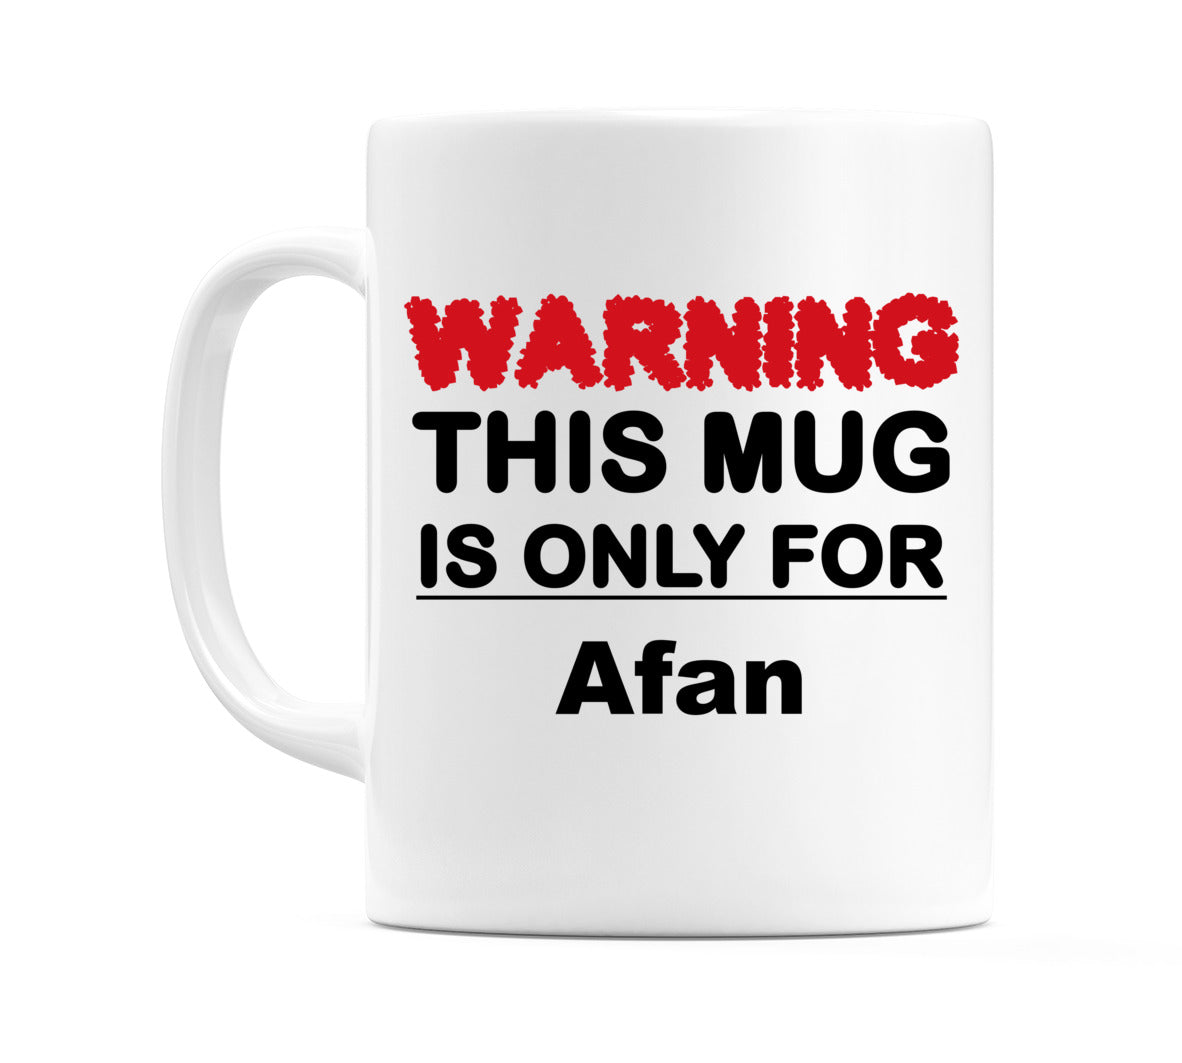 Warning This Mug is ONLY for Afan Mug